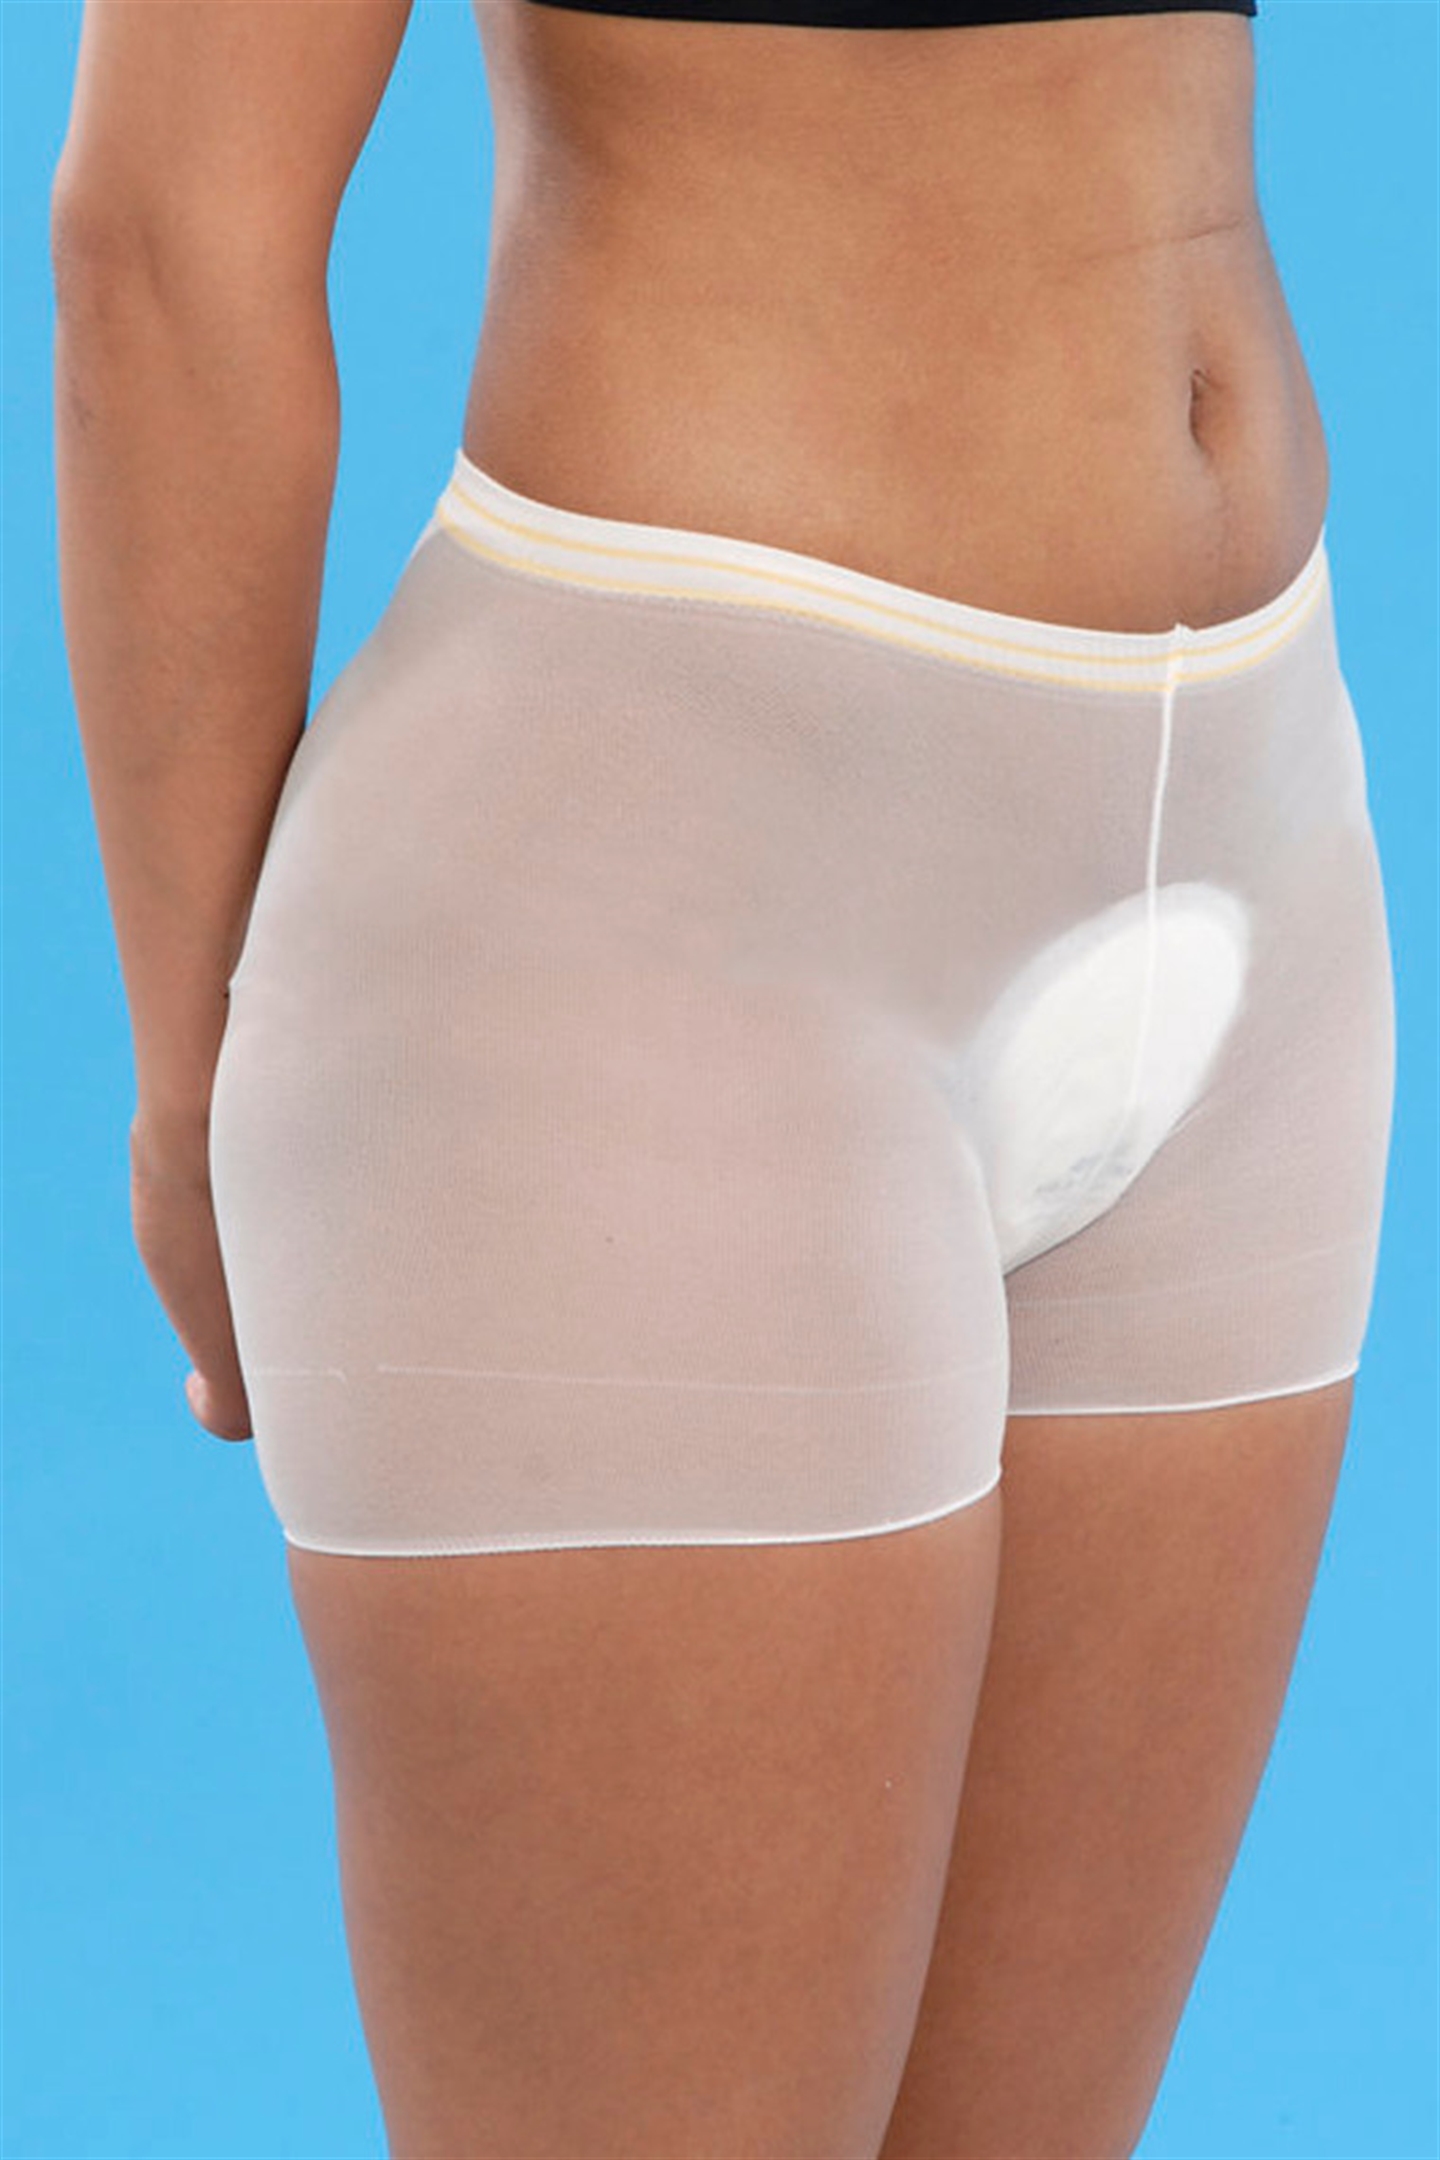 Small disposable pad with mesh support pants